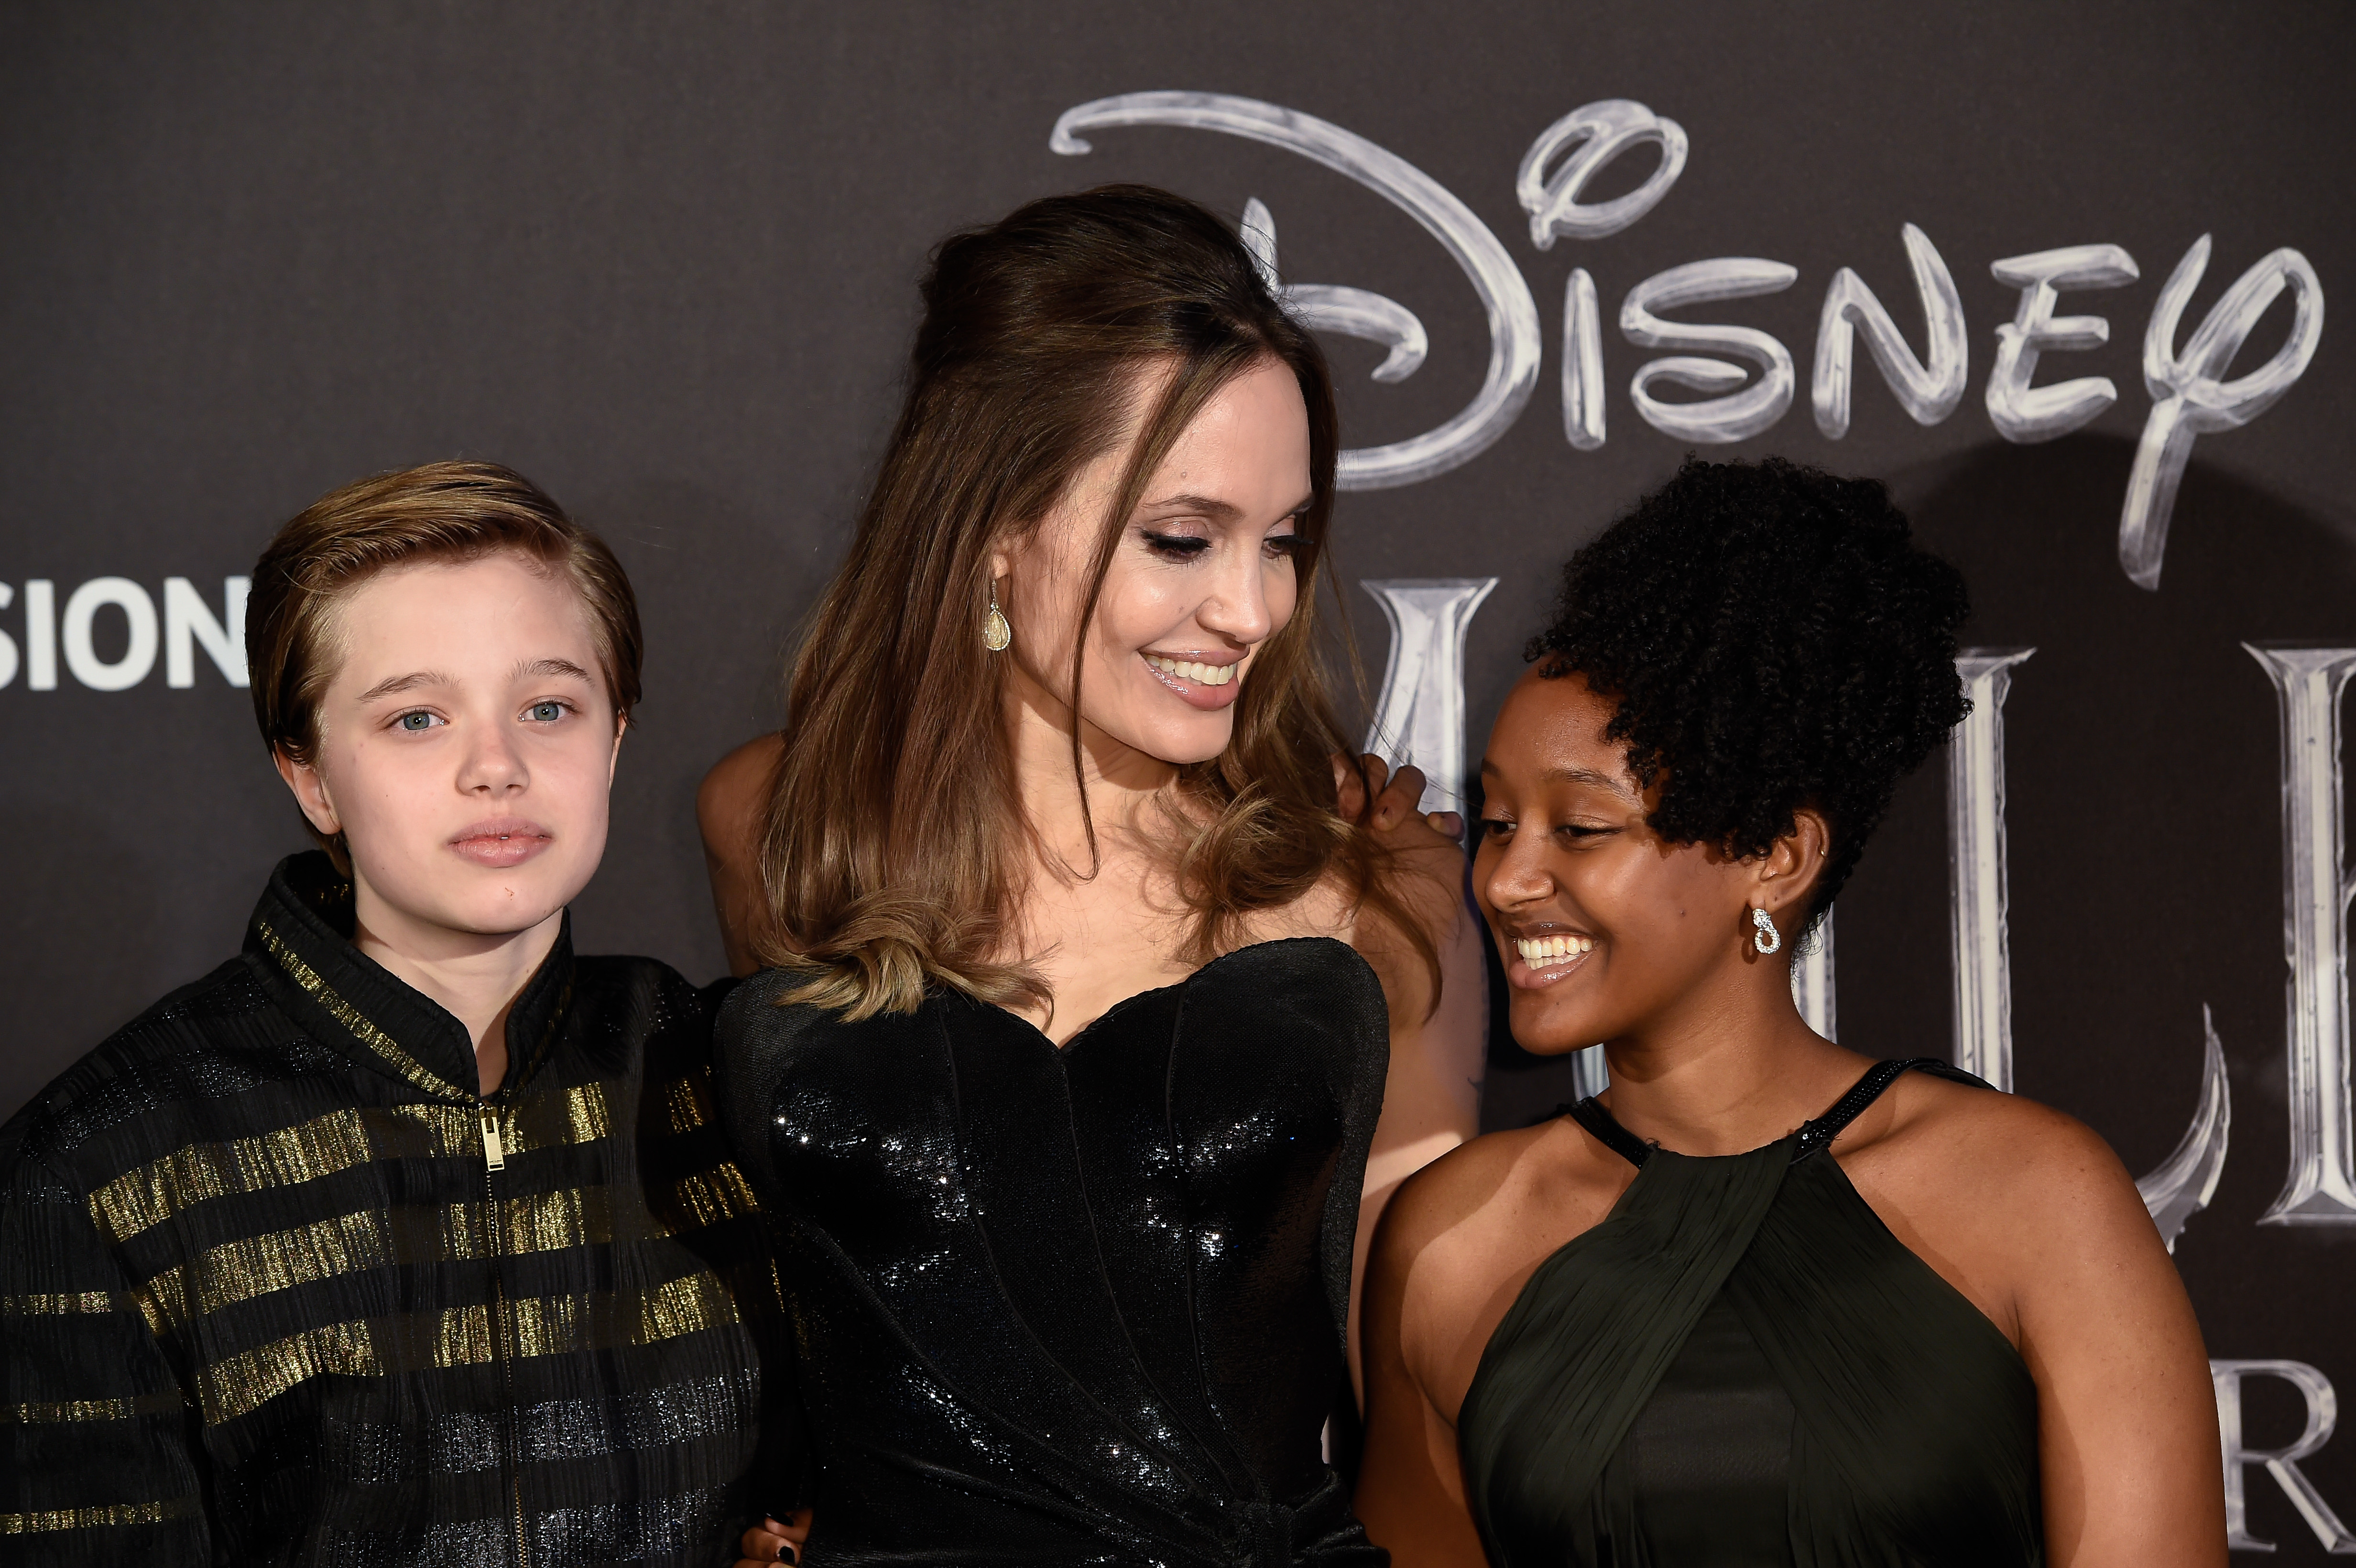 Shiloh Nouvel Jolie-Pitt, Angelina Jolie, and Zahara Marley Jolie-Pitt during the European premiere of "Maleficent: Lady of Evil" in Rome on October 7, 2019 | Source: Getty Images